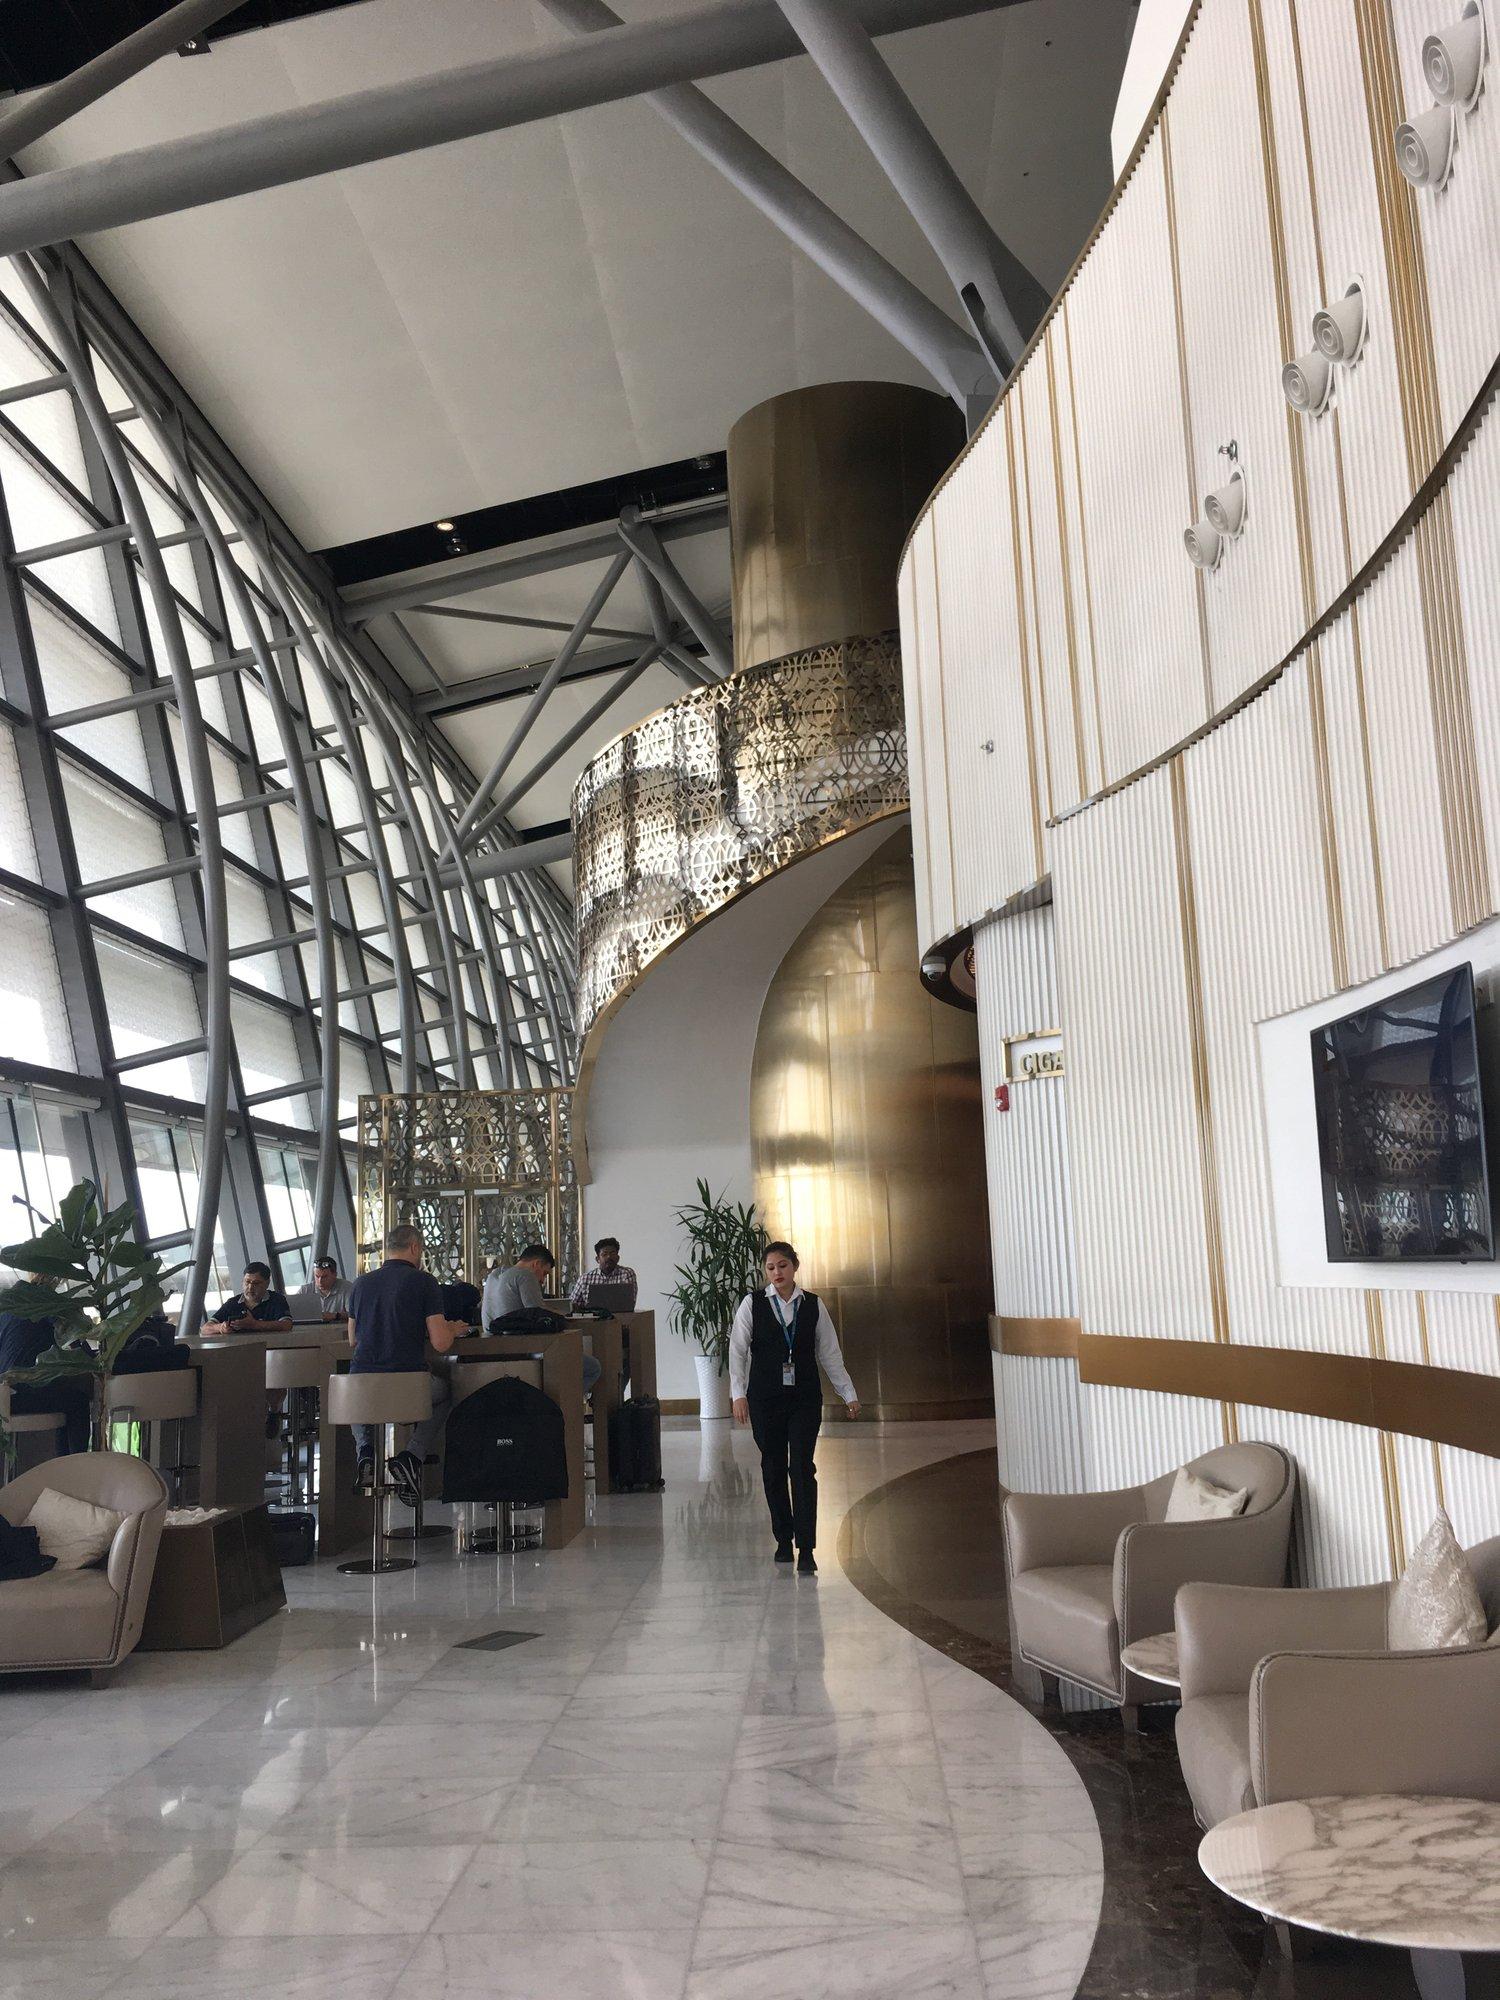 Oman Air Business Class Lounge image 2 of 2